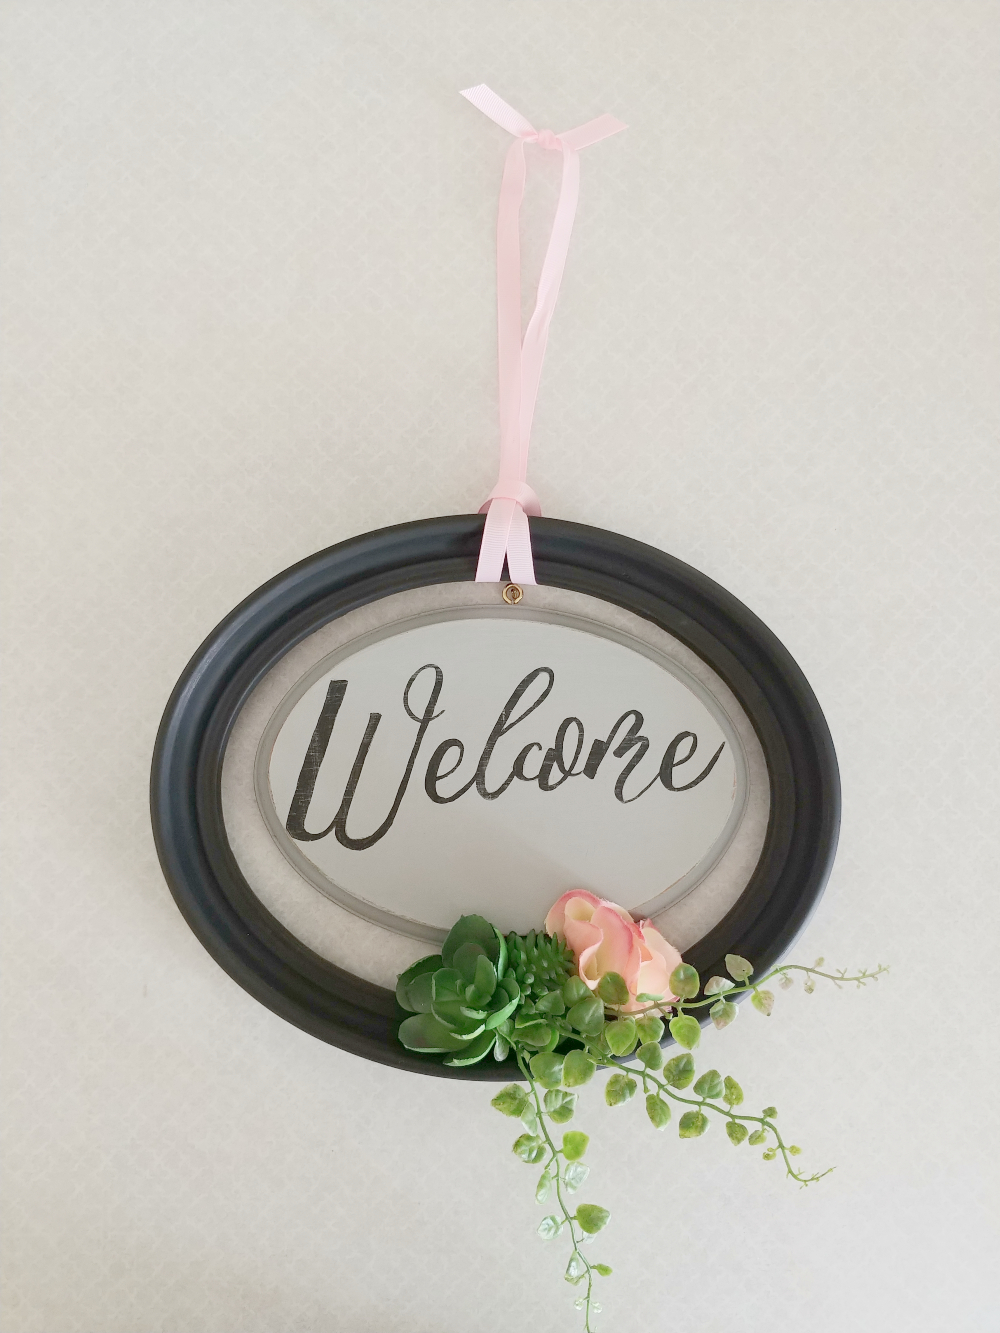 upcycled welcome sign